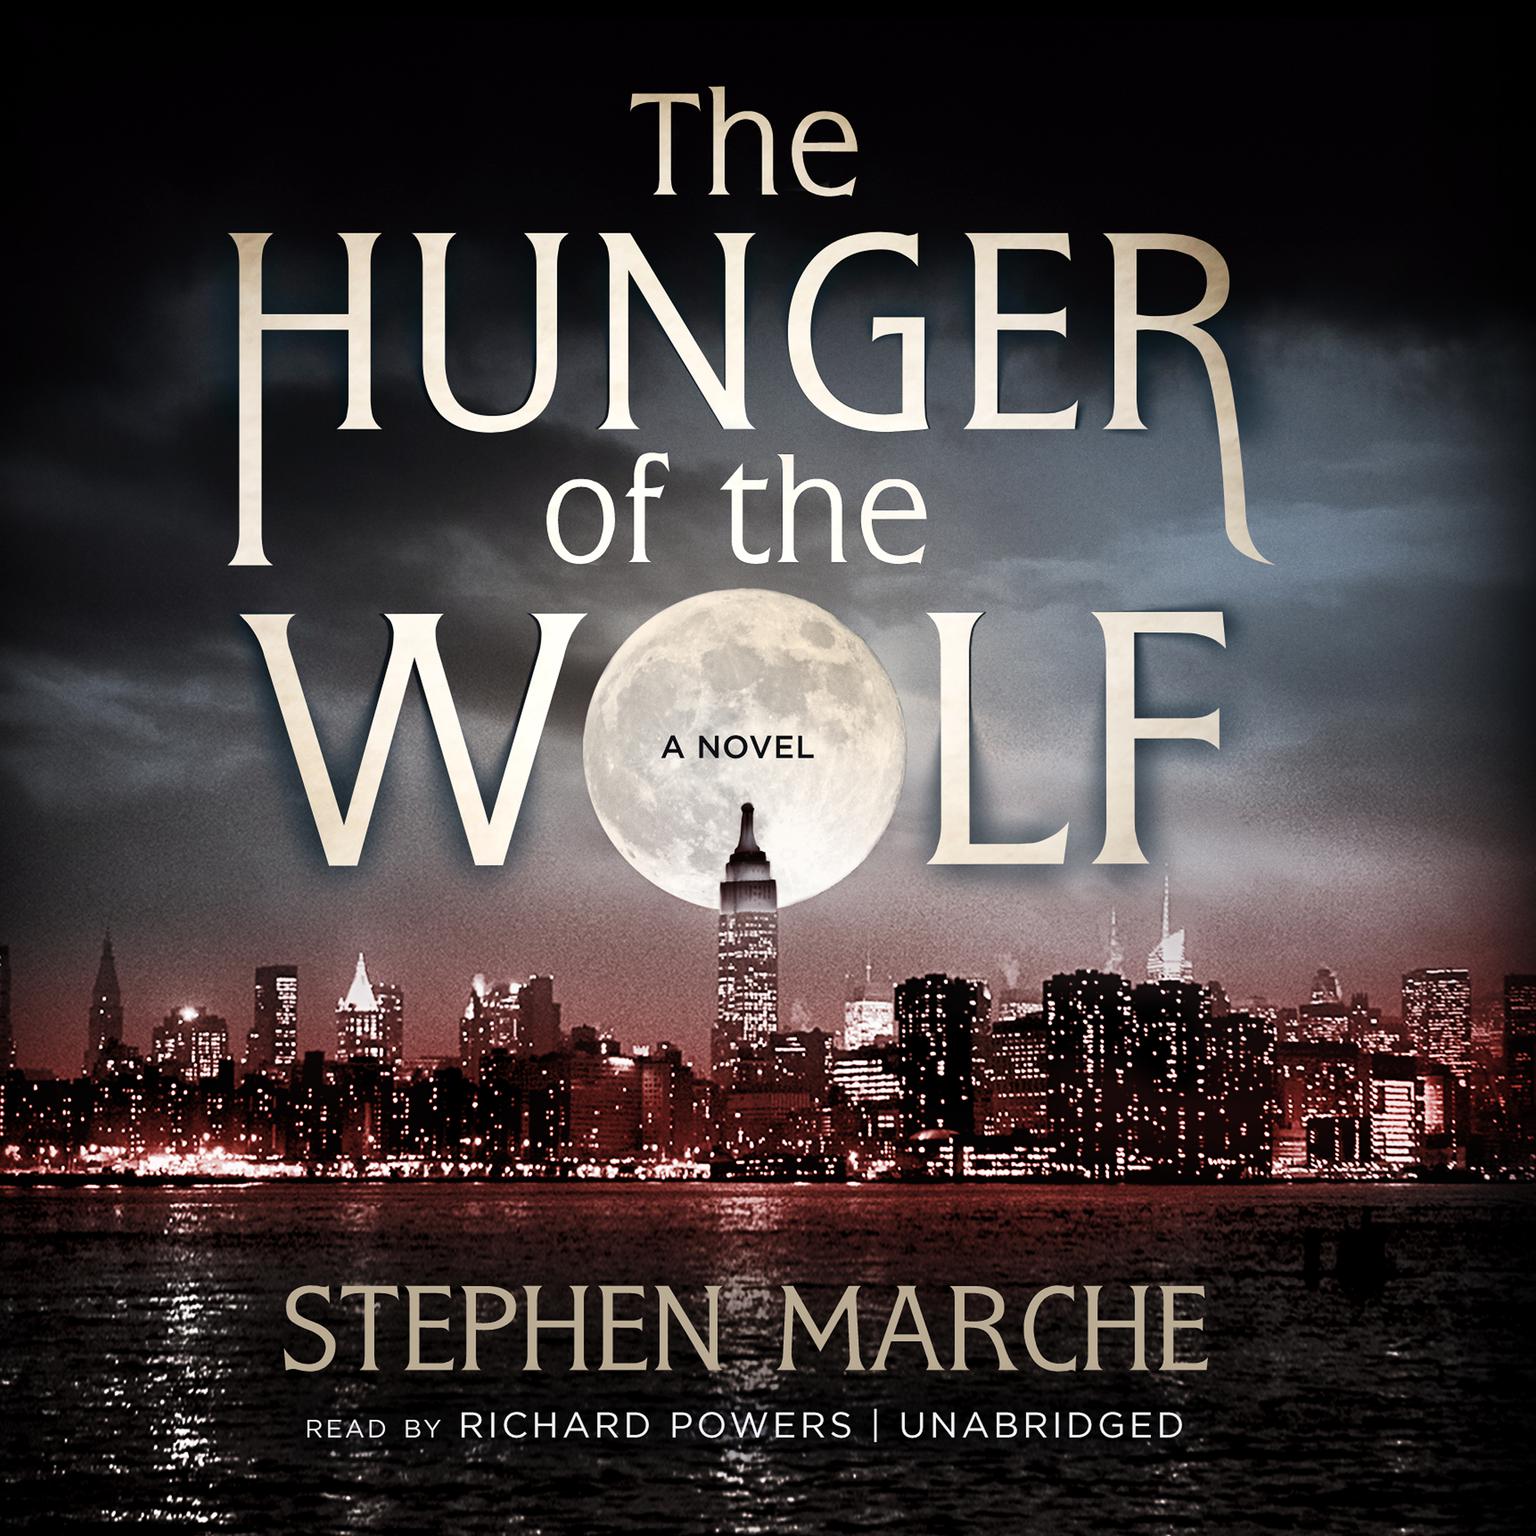 The Hunger of the Wolf: A Novel Audiobook, by Stephen Marche